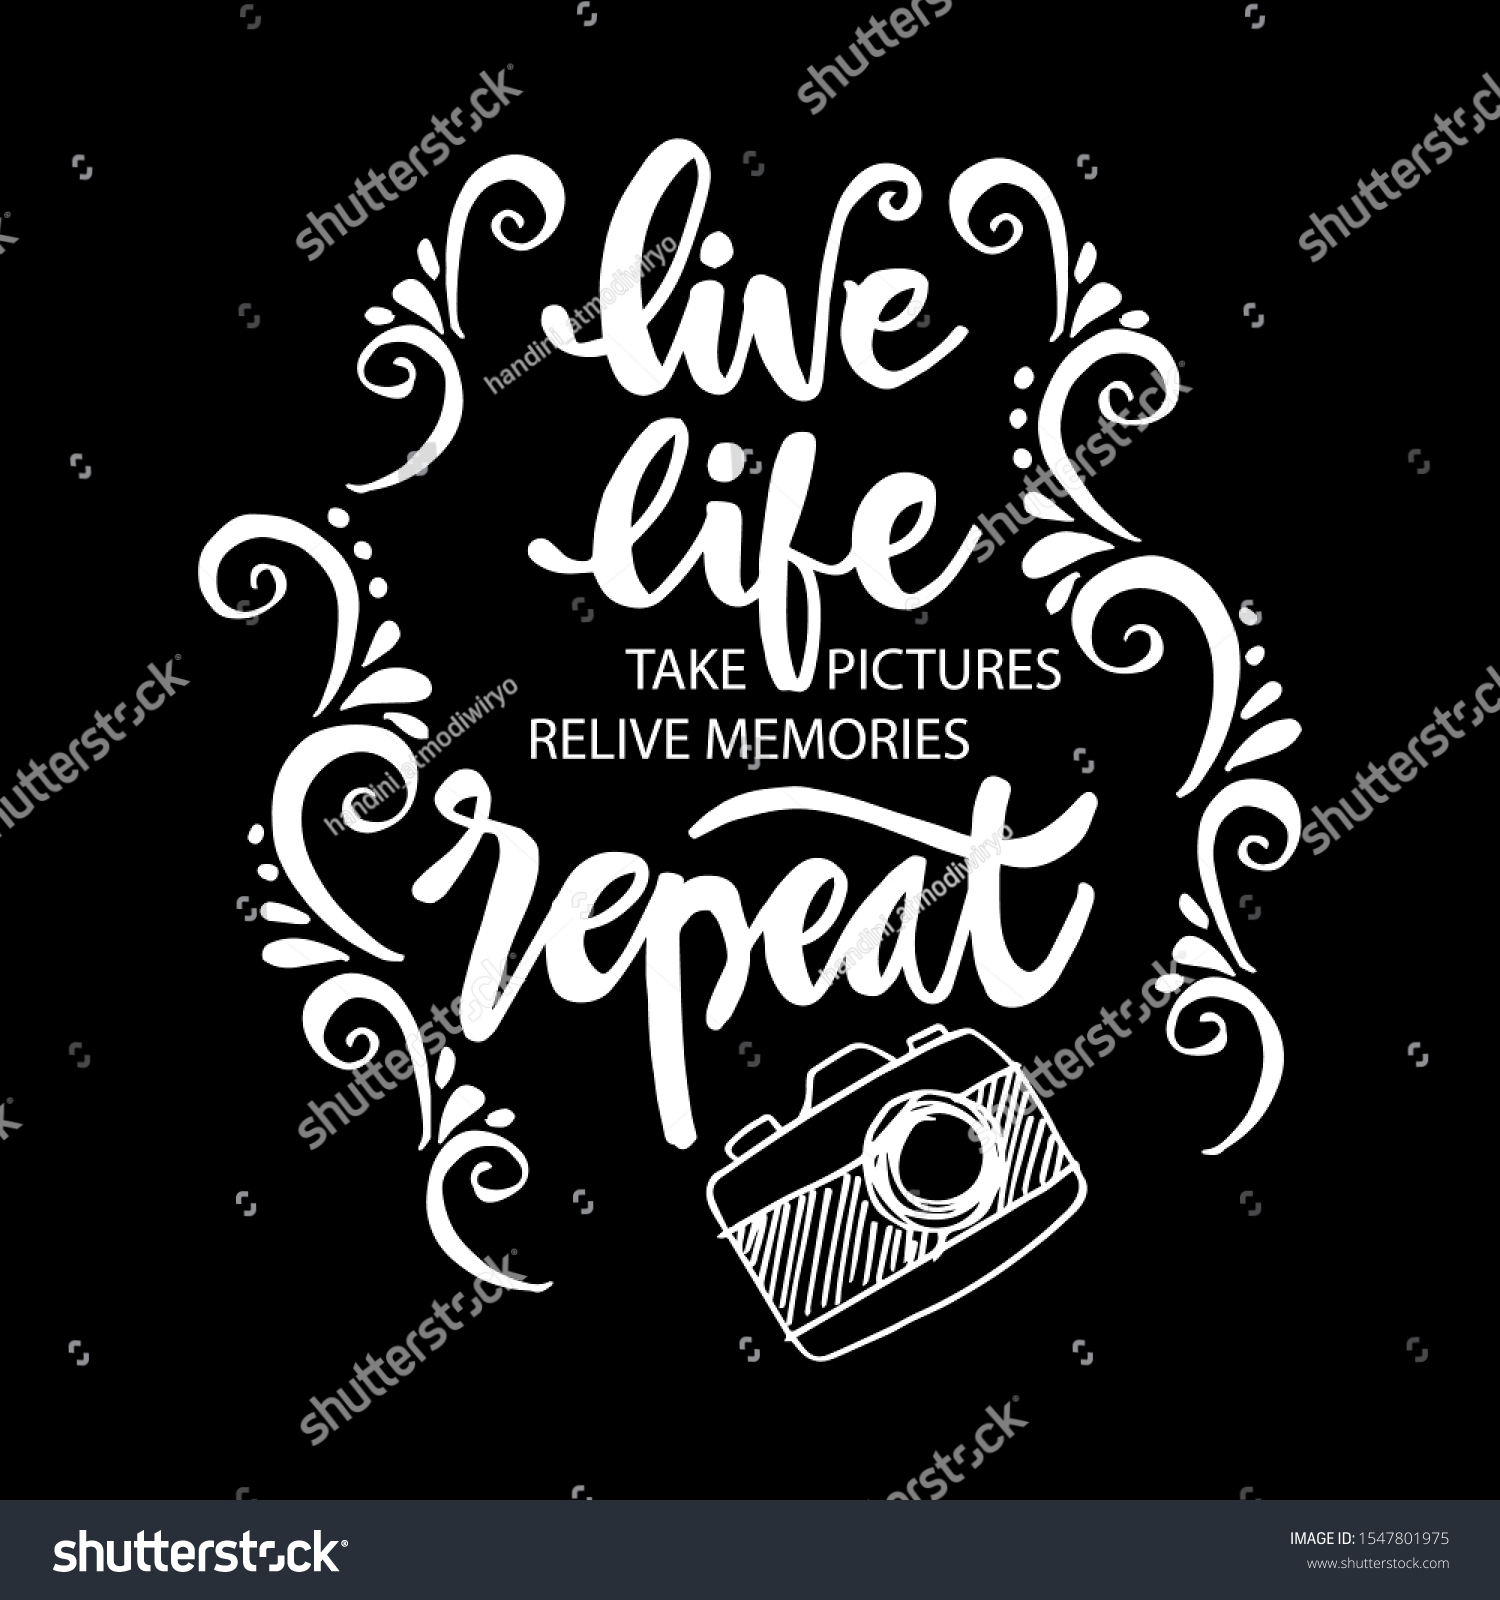 Live Life Take Pictures Relive Memories Stock Vector Royalty Free